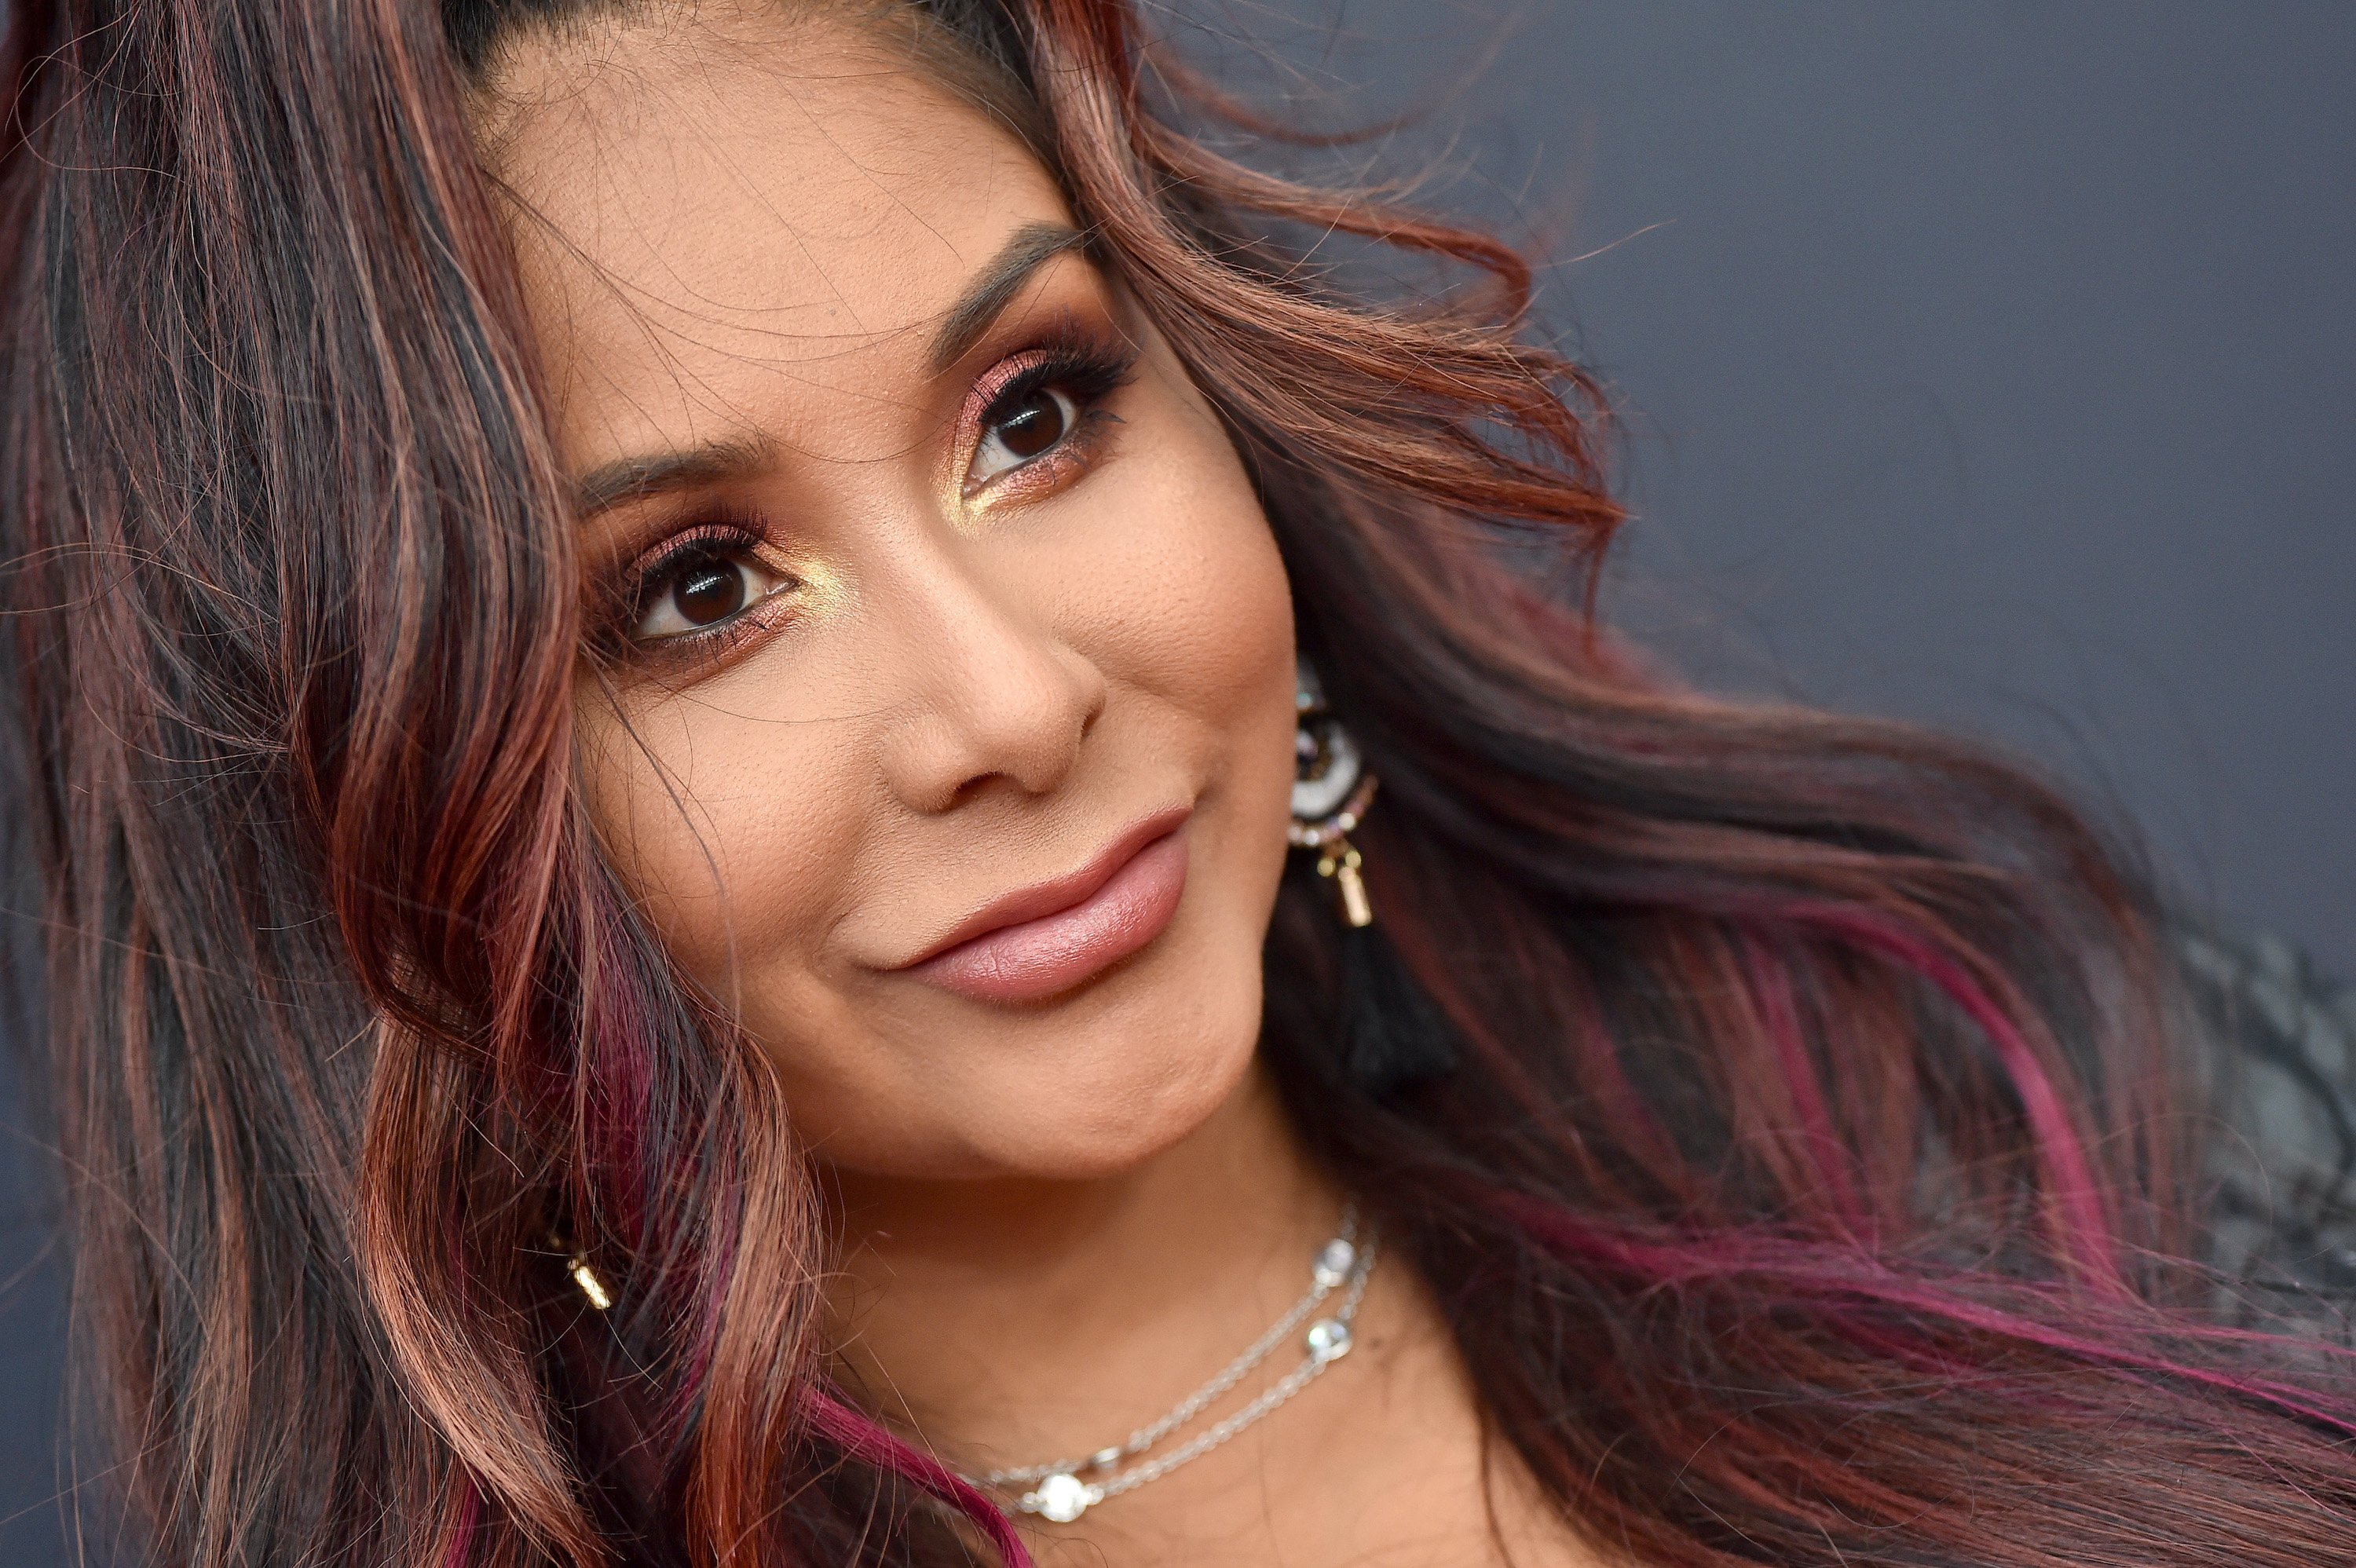 Close up photo of Nicole 'Snooki' Polizzi from the red carpet at the 2019 MTV Video Music Awards